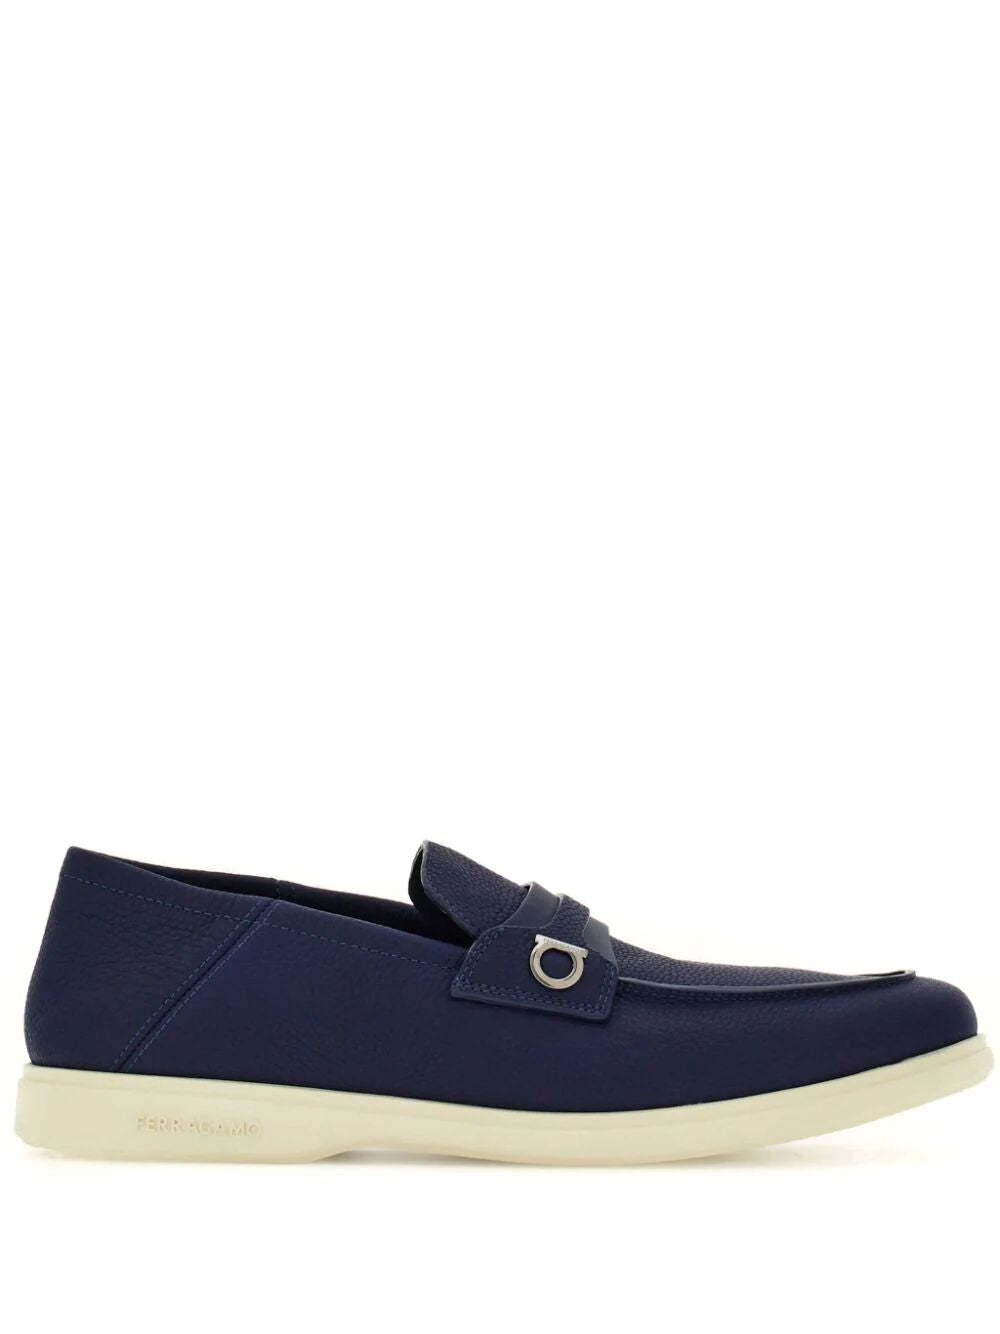 FERRAGAMO Classic Navy Blue Leather Loafers for Men